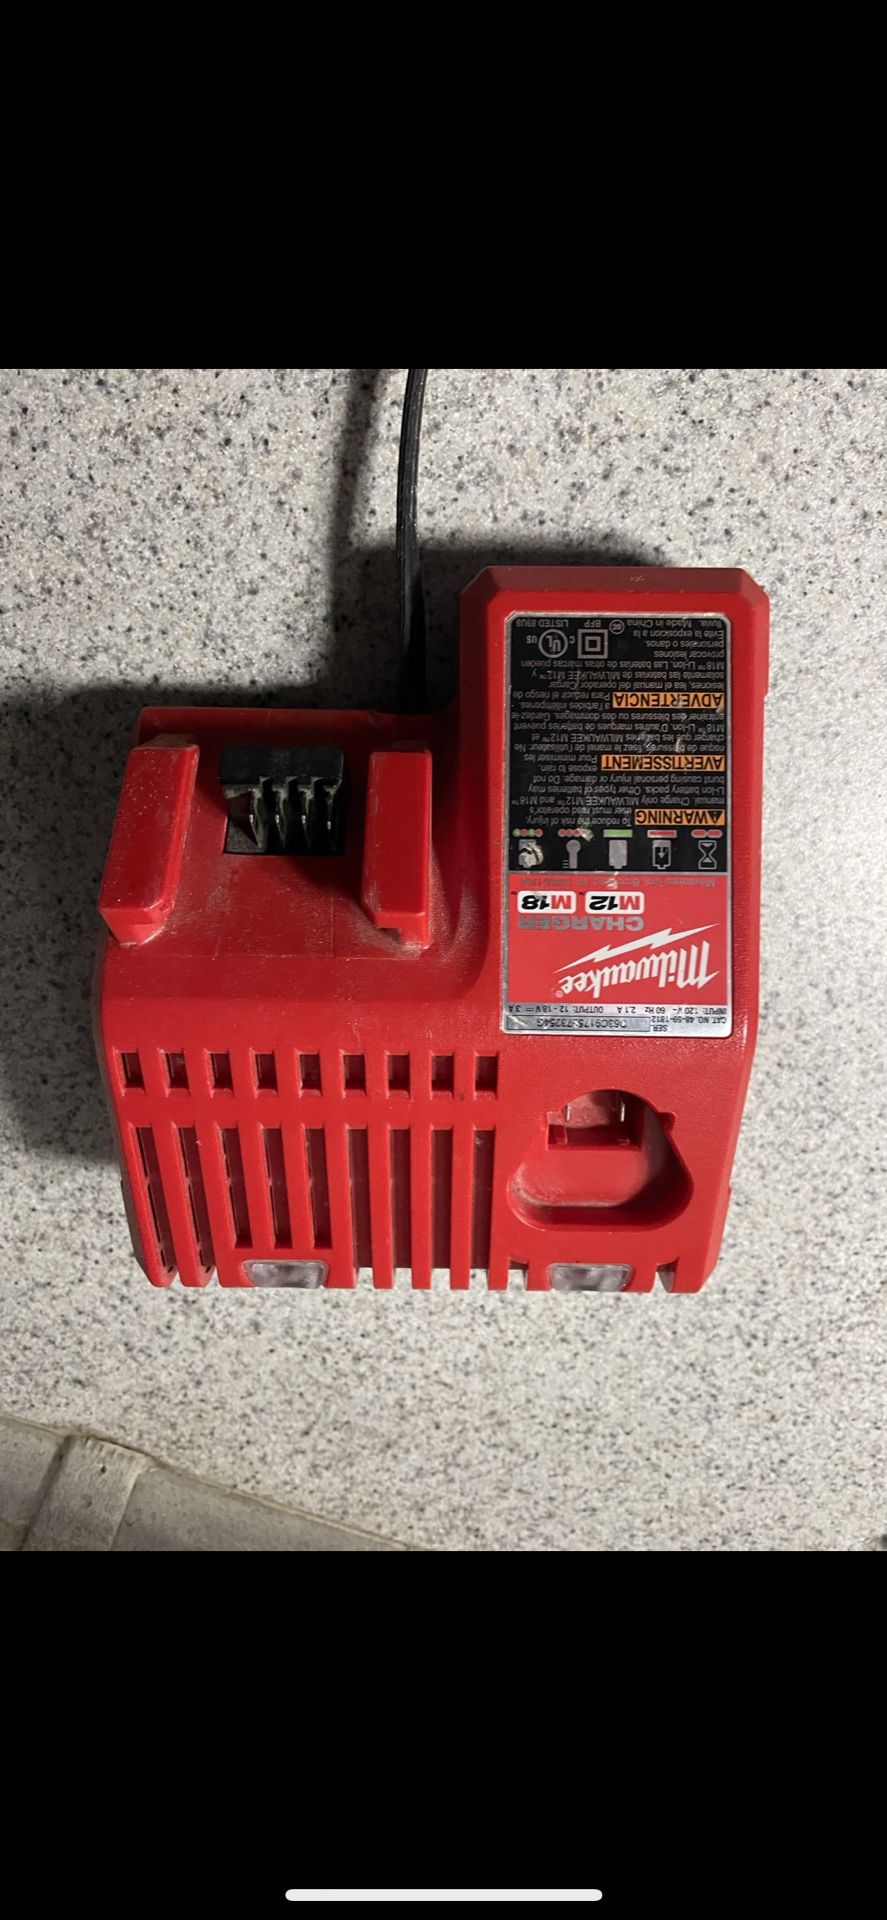 Milwaukee M12/m18 Charger 